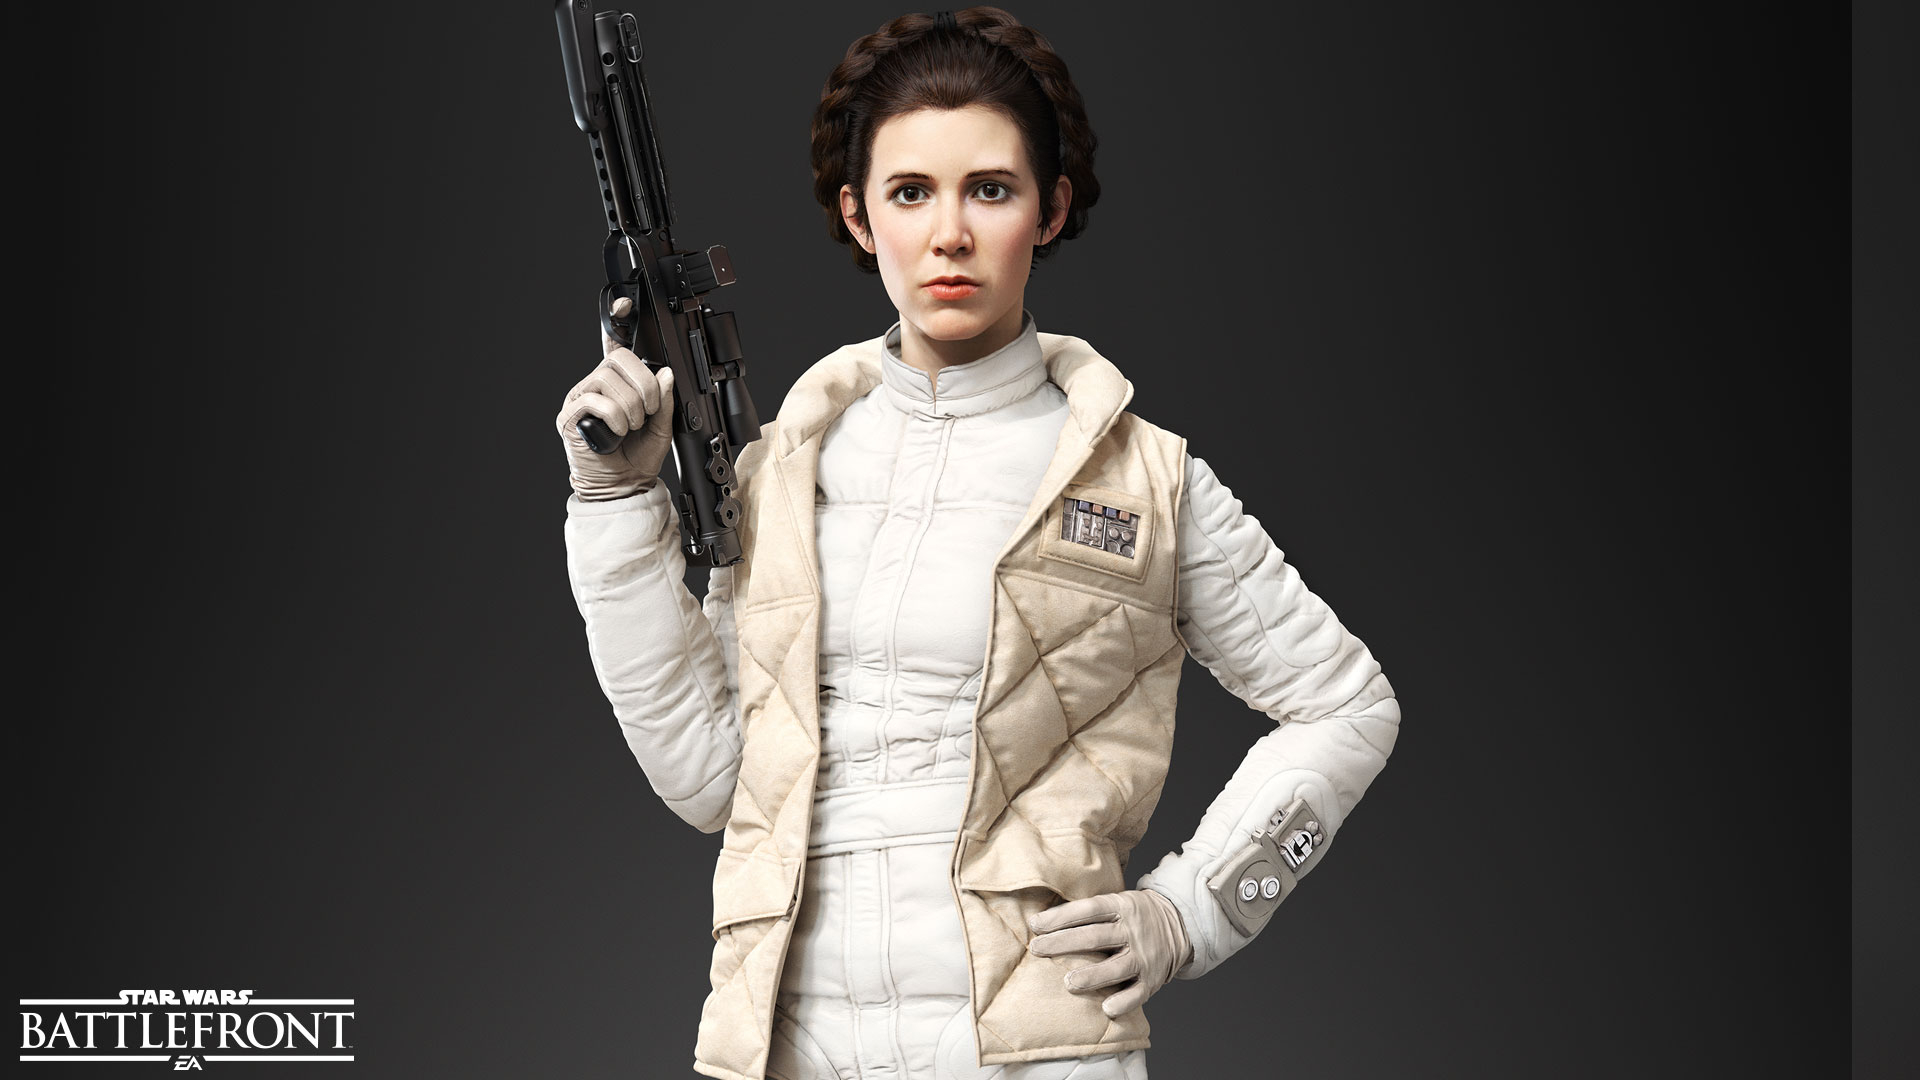 1920x1080 Star Wars Battlefront: Princess Leia, Han Solo, Emperor Palpatine As Playable Characters